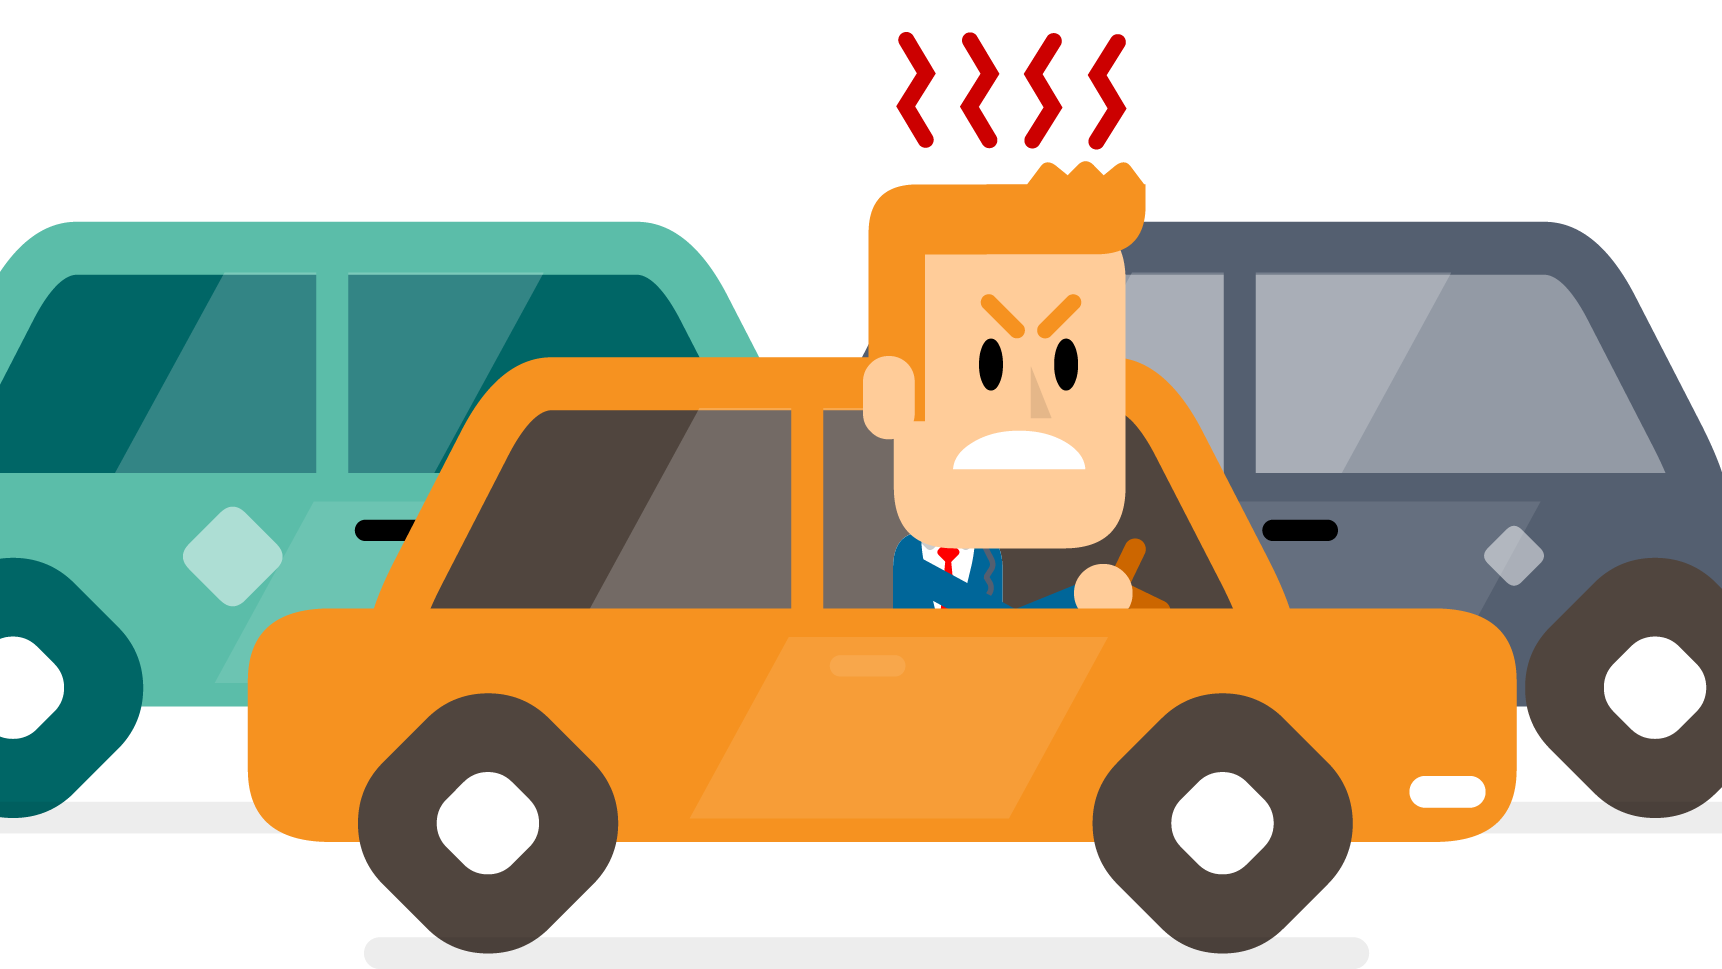 RCTC Reboot Your Commute Angry Driver